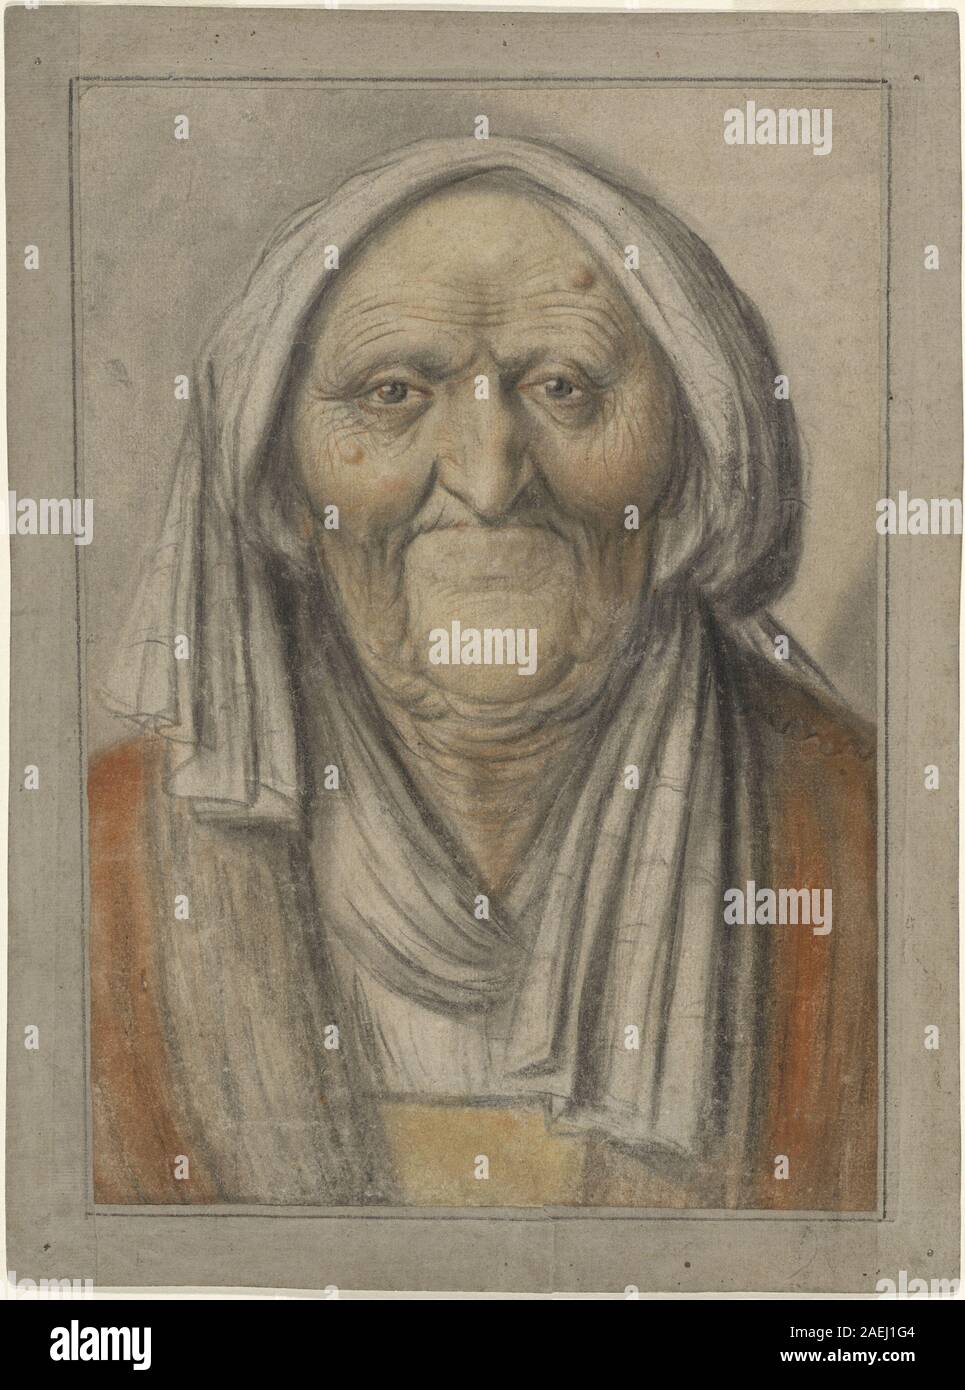 Lagneau, Bust of an Old Woman Wearing a Head Scarf, c 1625 Bust of an Old Woman Wearing a Head Scarf; circa 1625 date Stock Photo